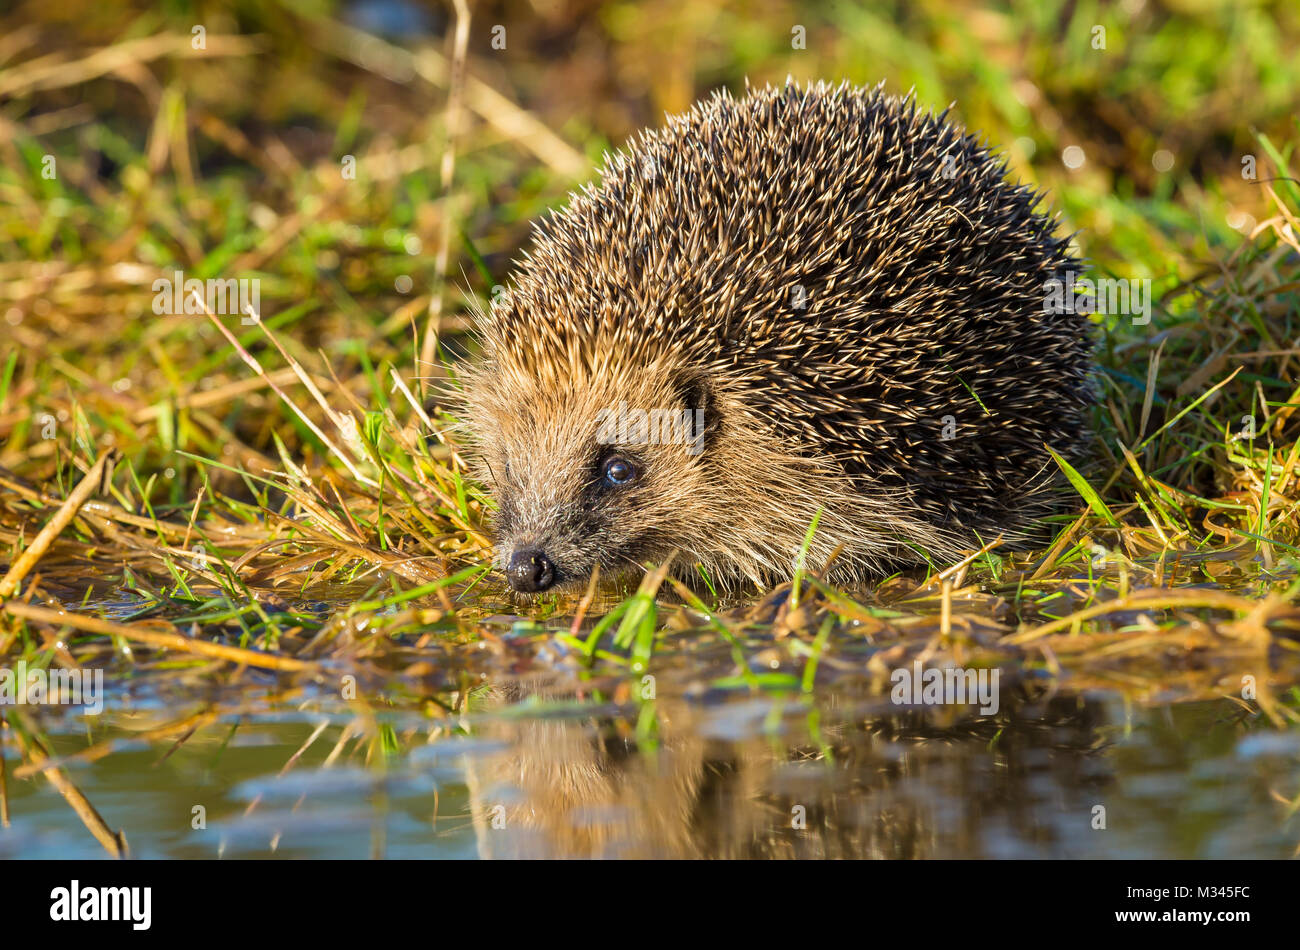 Native, European, wild hedgehog about to take a drink at a pool of water Stock Photo